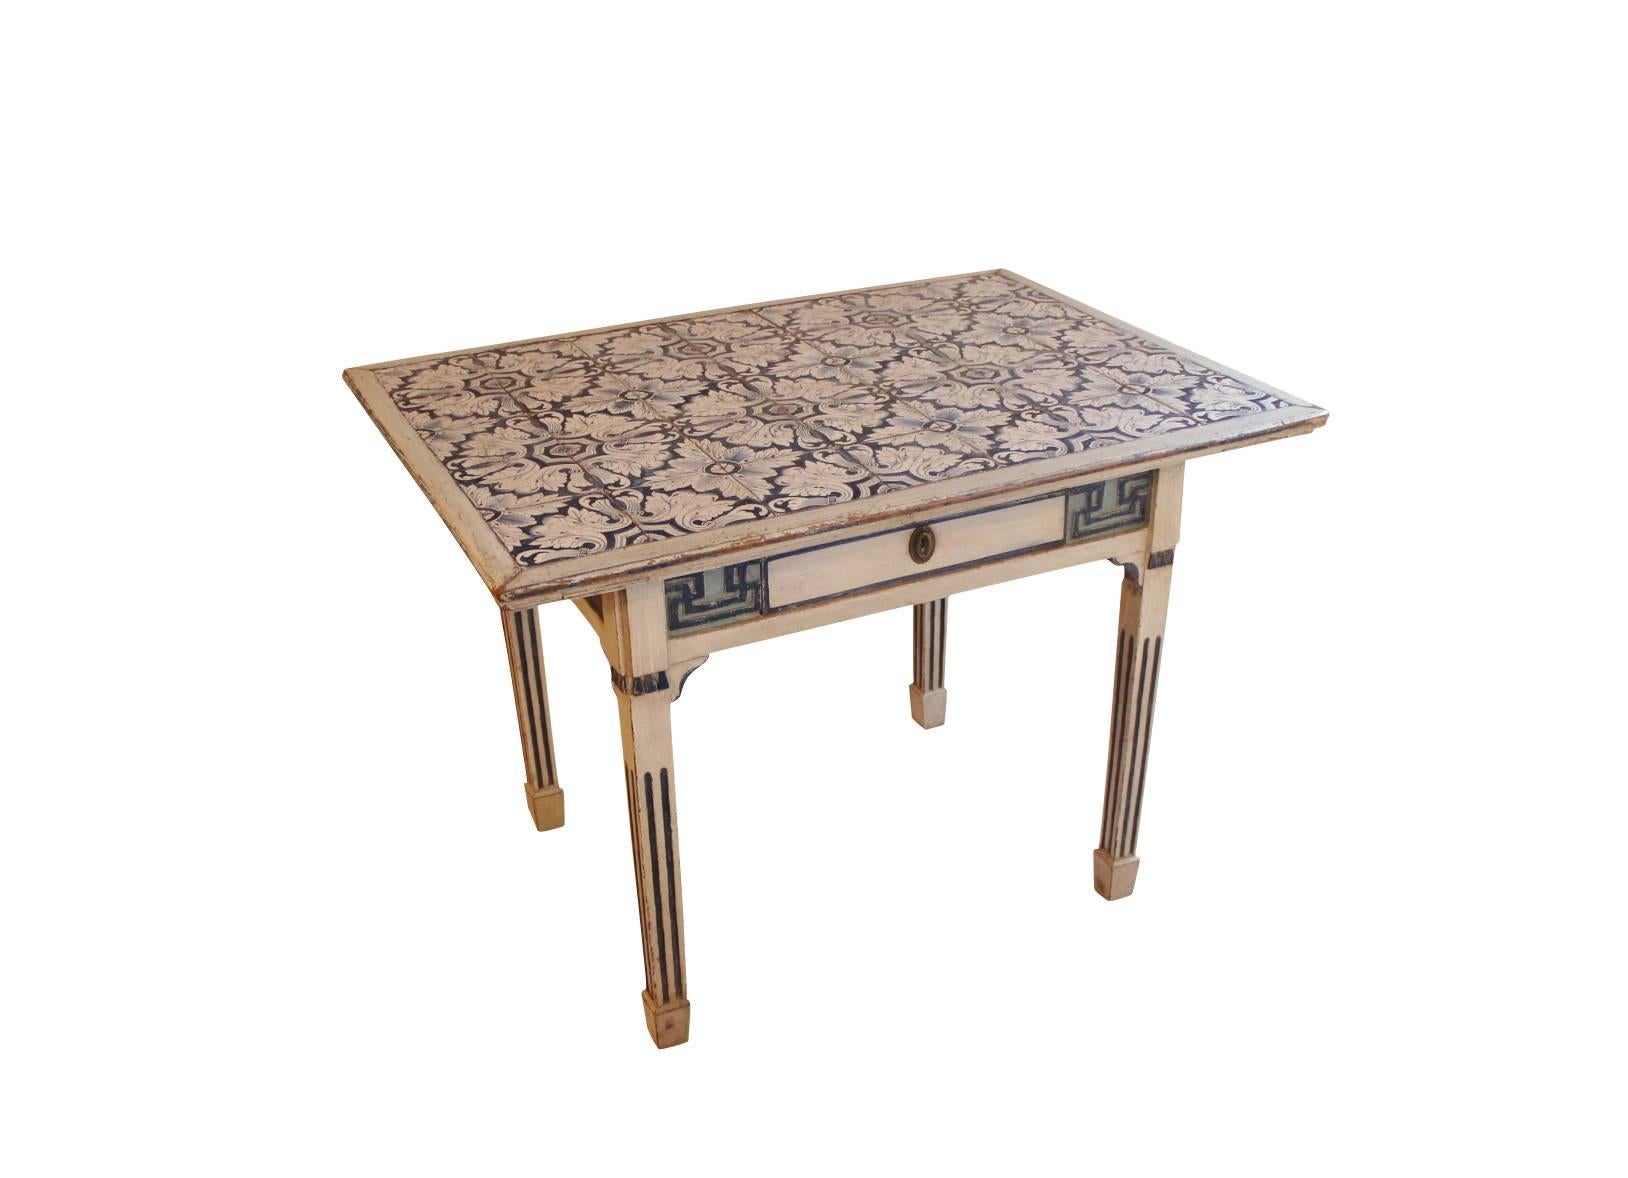 Tile-top table made in Denmark in 1780, with Dutch tiles with a small drawer in the front. The table is of the Louis XVI period and is in grey and blue painted wood.